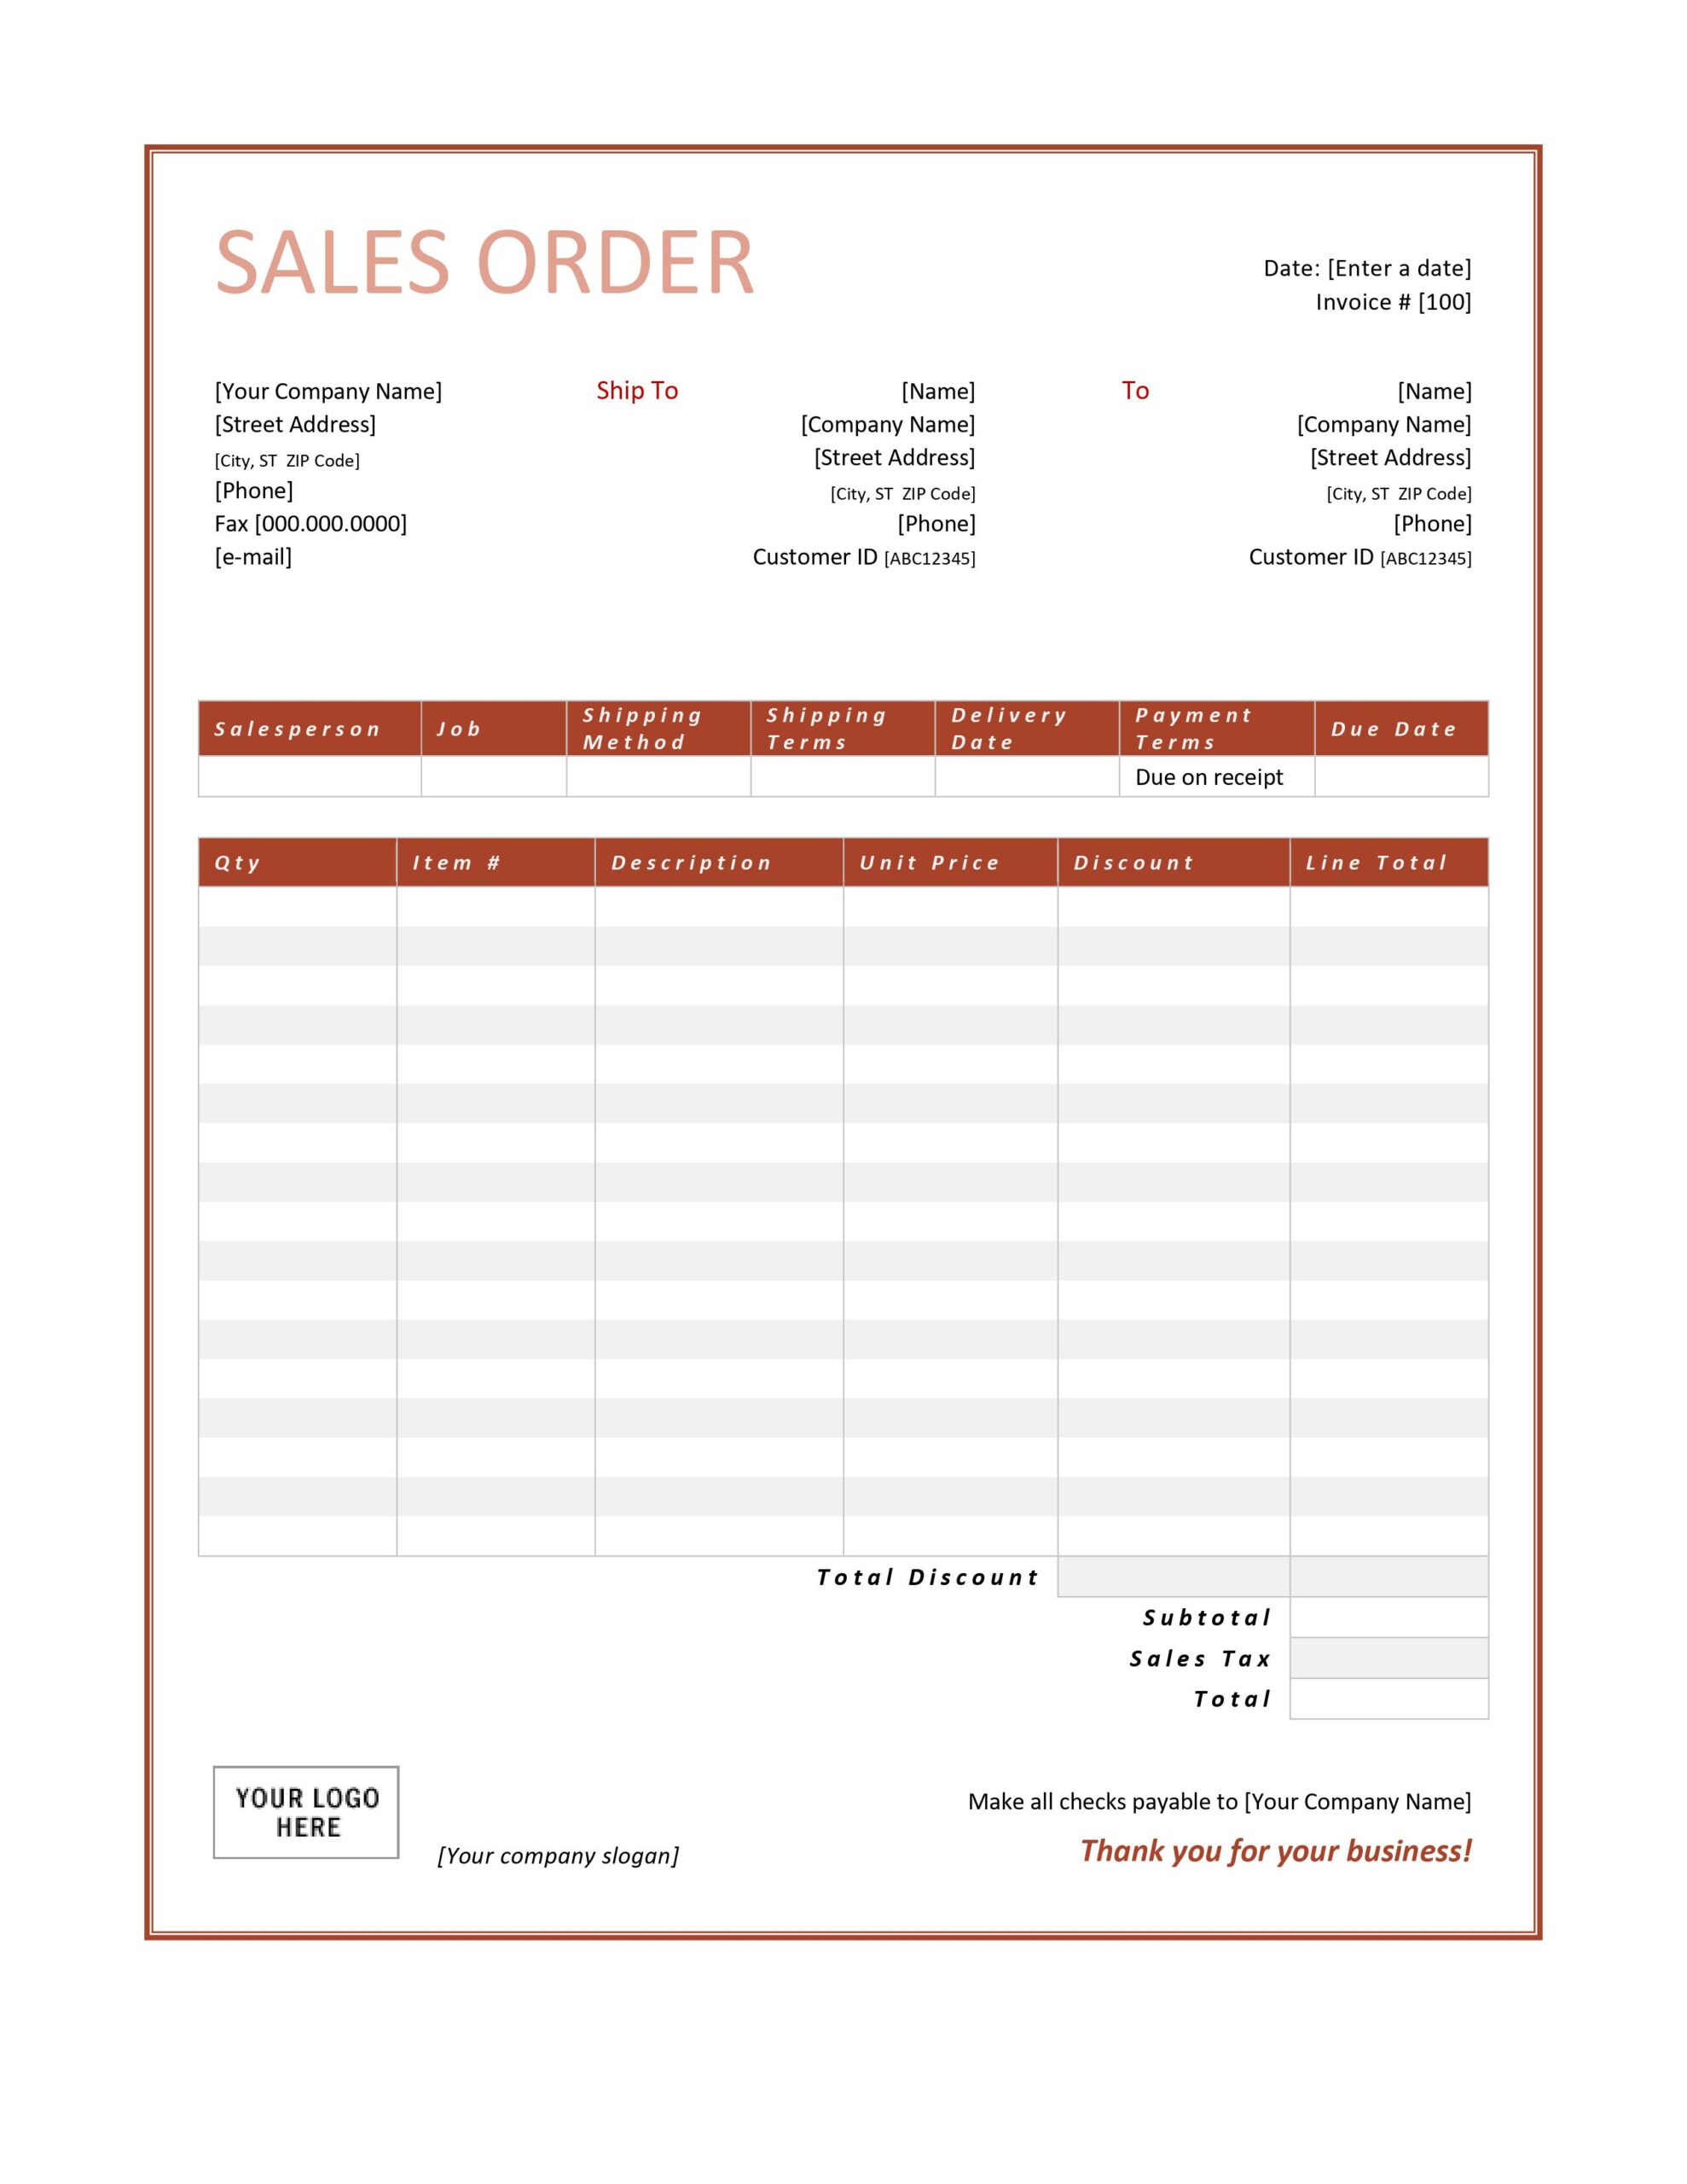 Releasing order. Sales order. Perfect order Template логистика. Order form for Production.